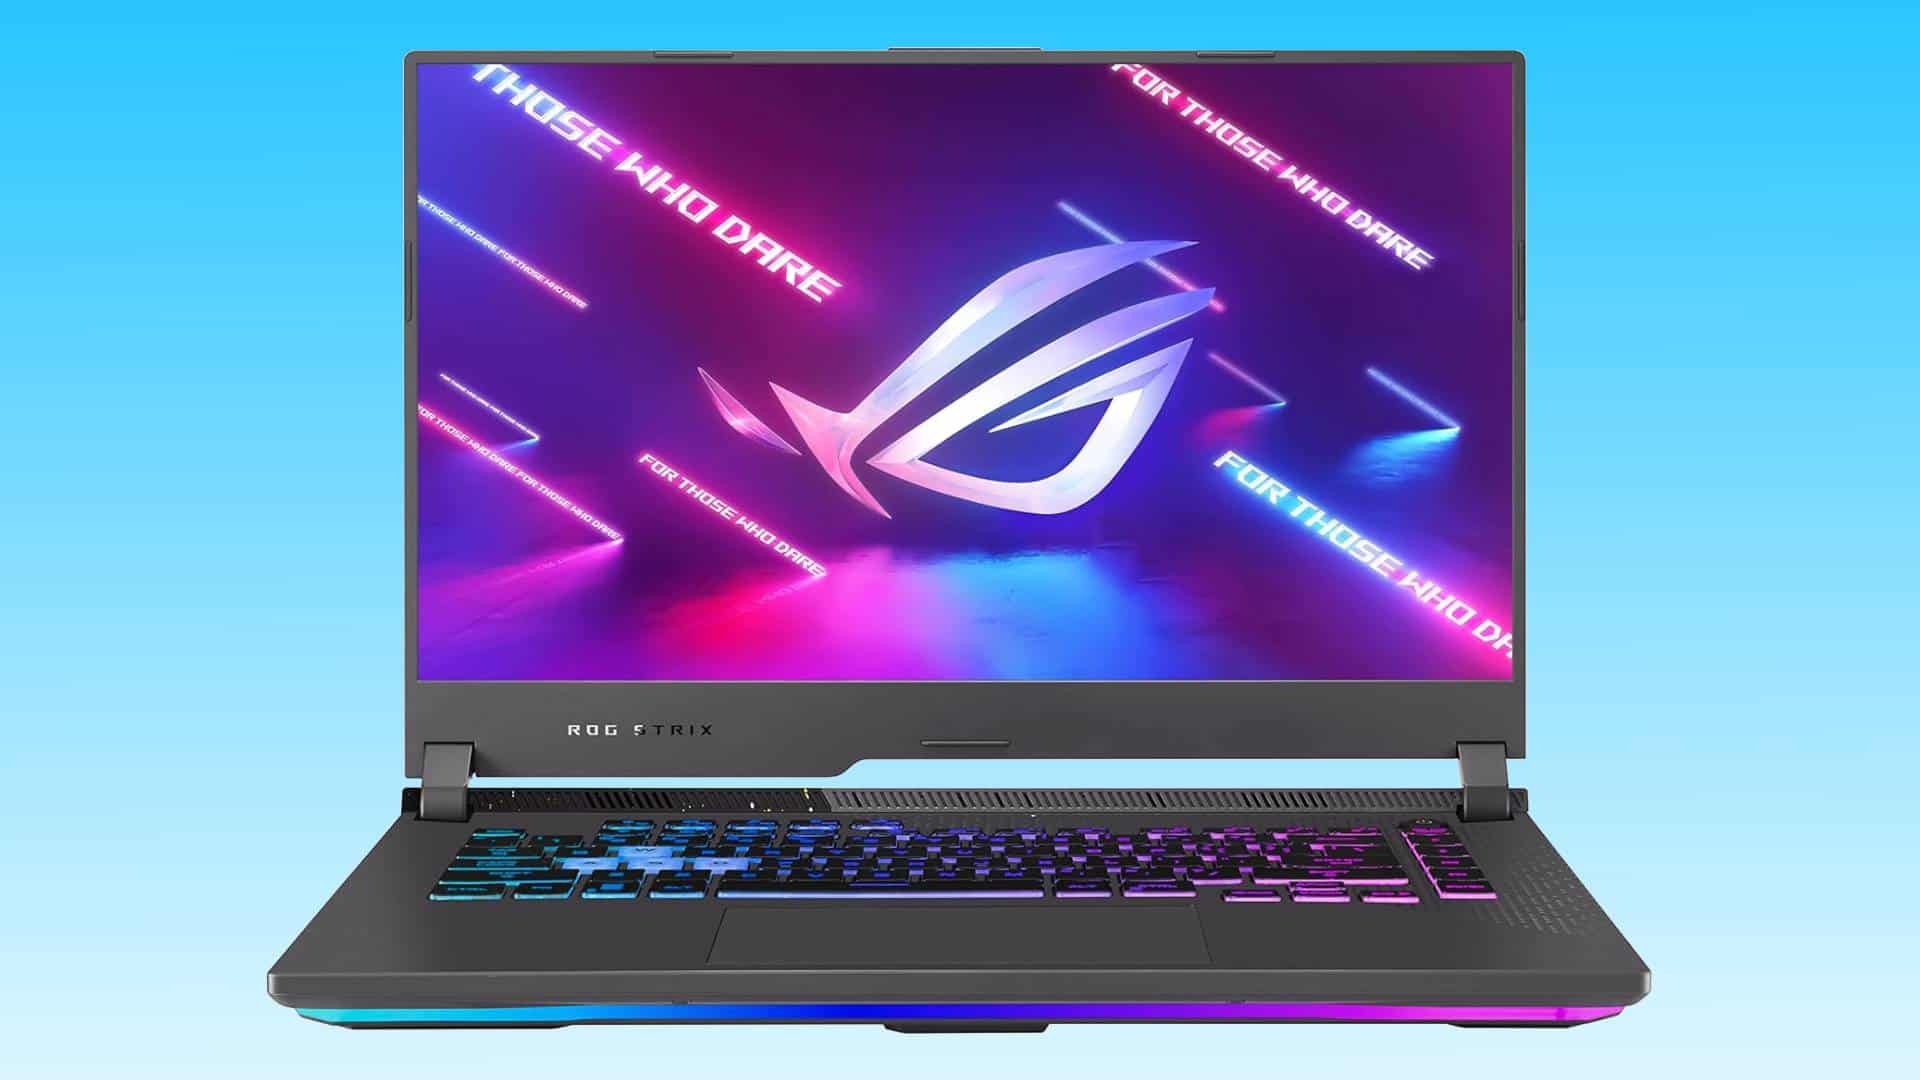 Asus ROG Strix gaming laptop with an open colorful neon-lit screen showcasing the brand logo, set on a blue background.